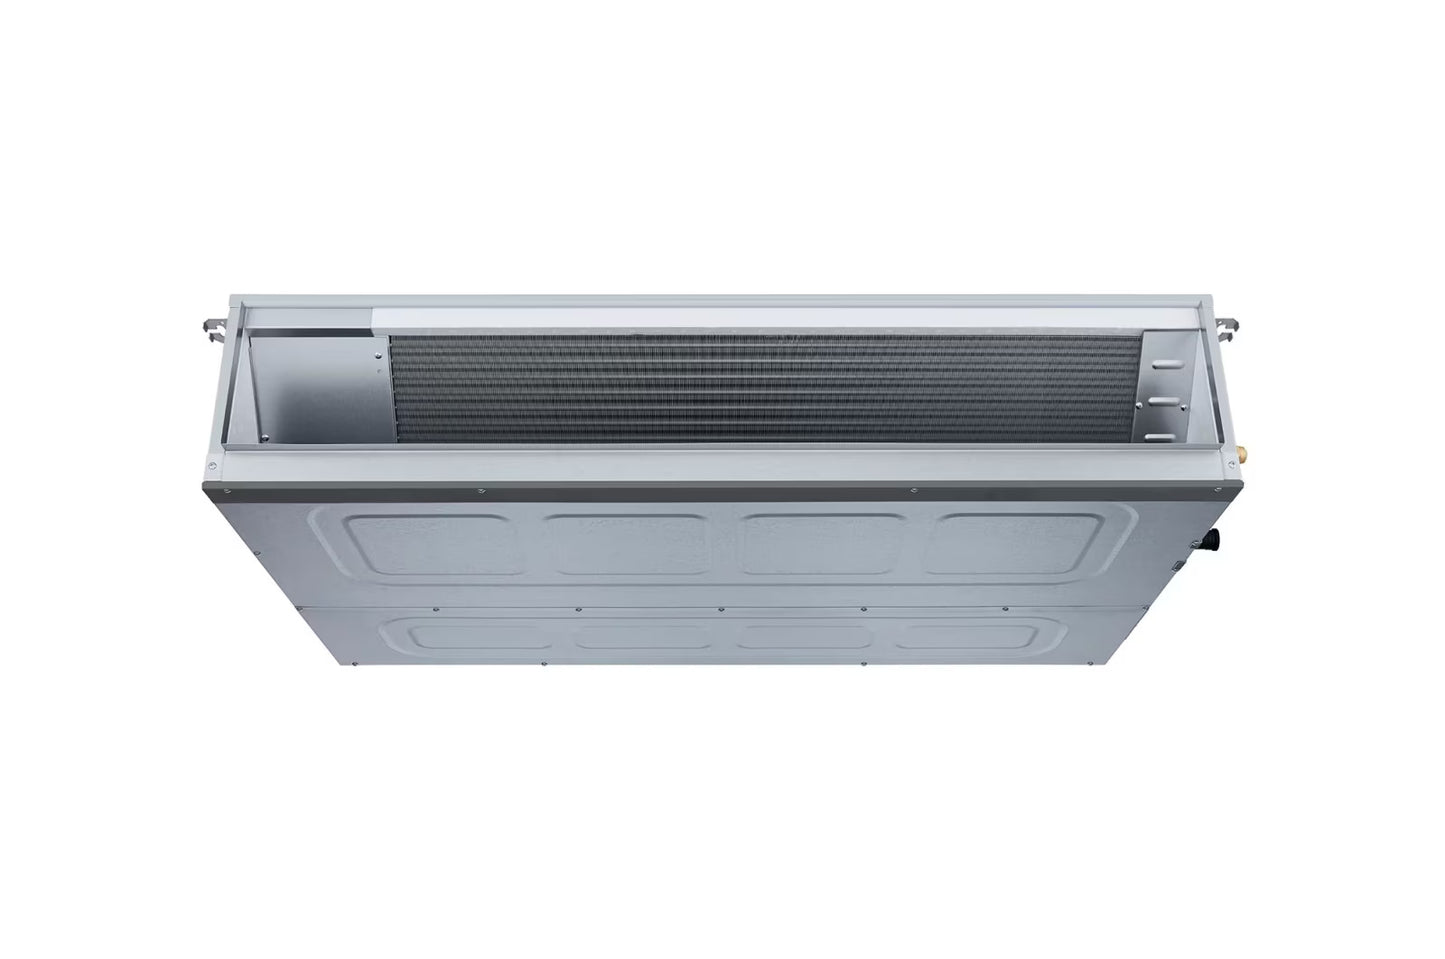 LG Ceiling Concealed Duct INV Unit 2.8KW with Mid Static and E.S.P. Control for Multiple Rooms - ARNU09GM1A4